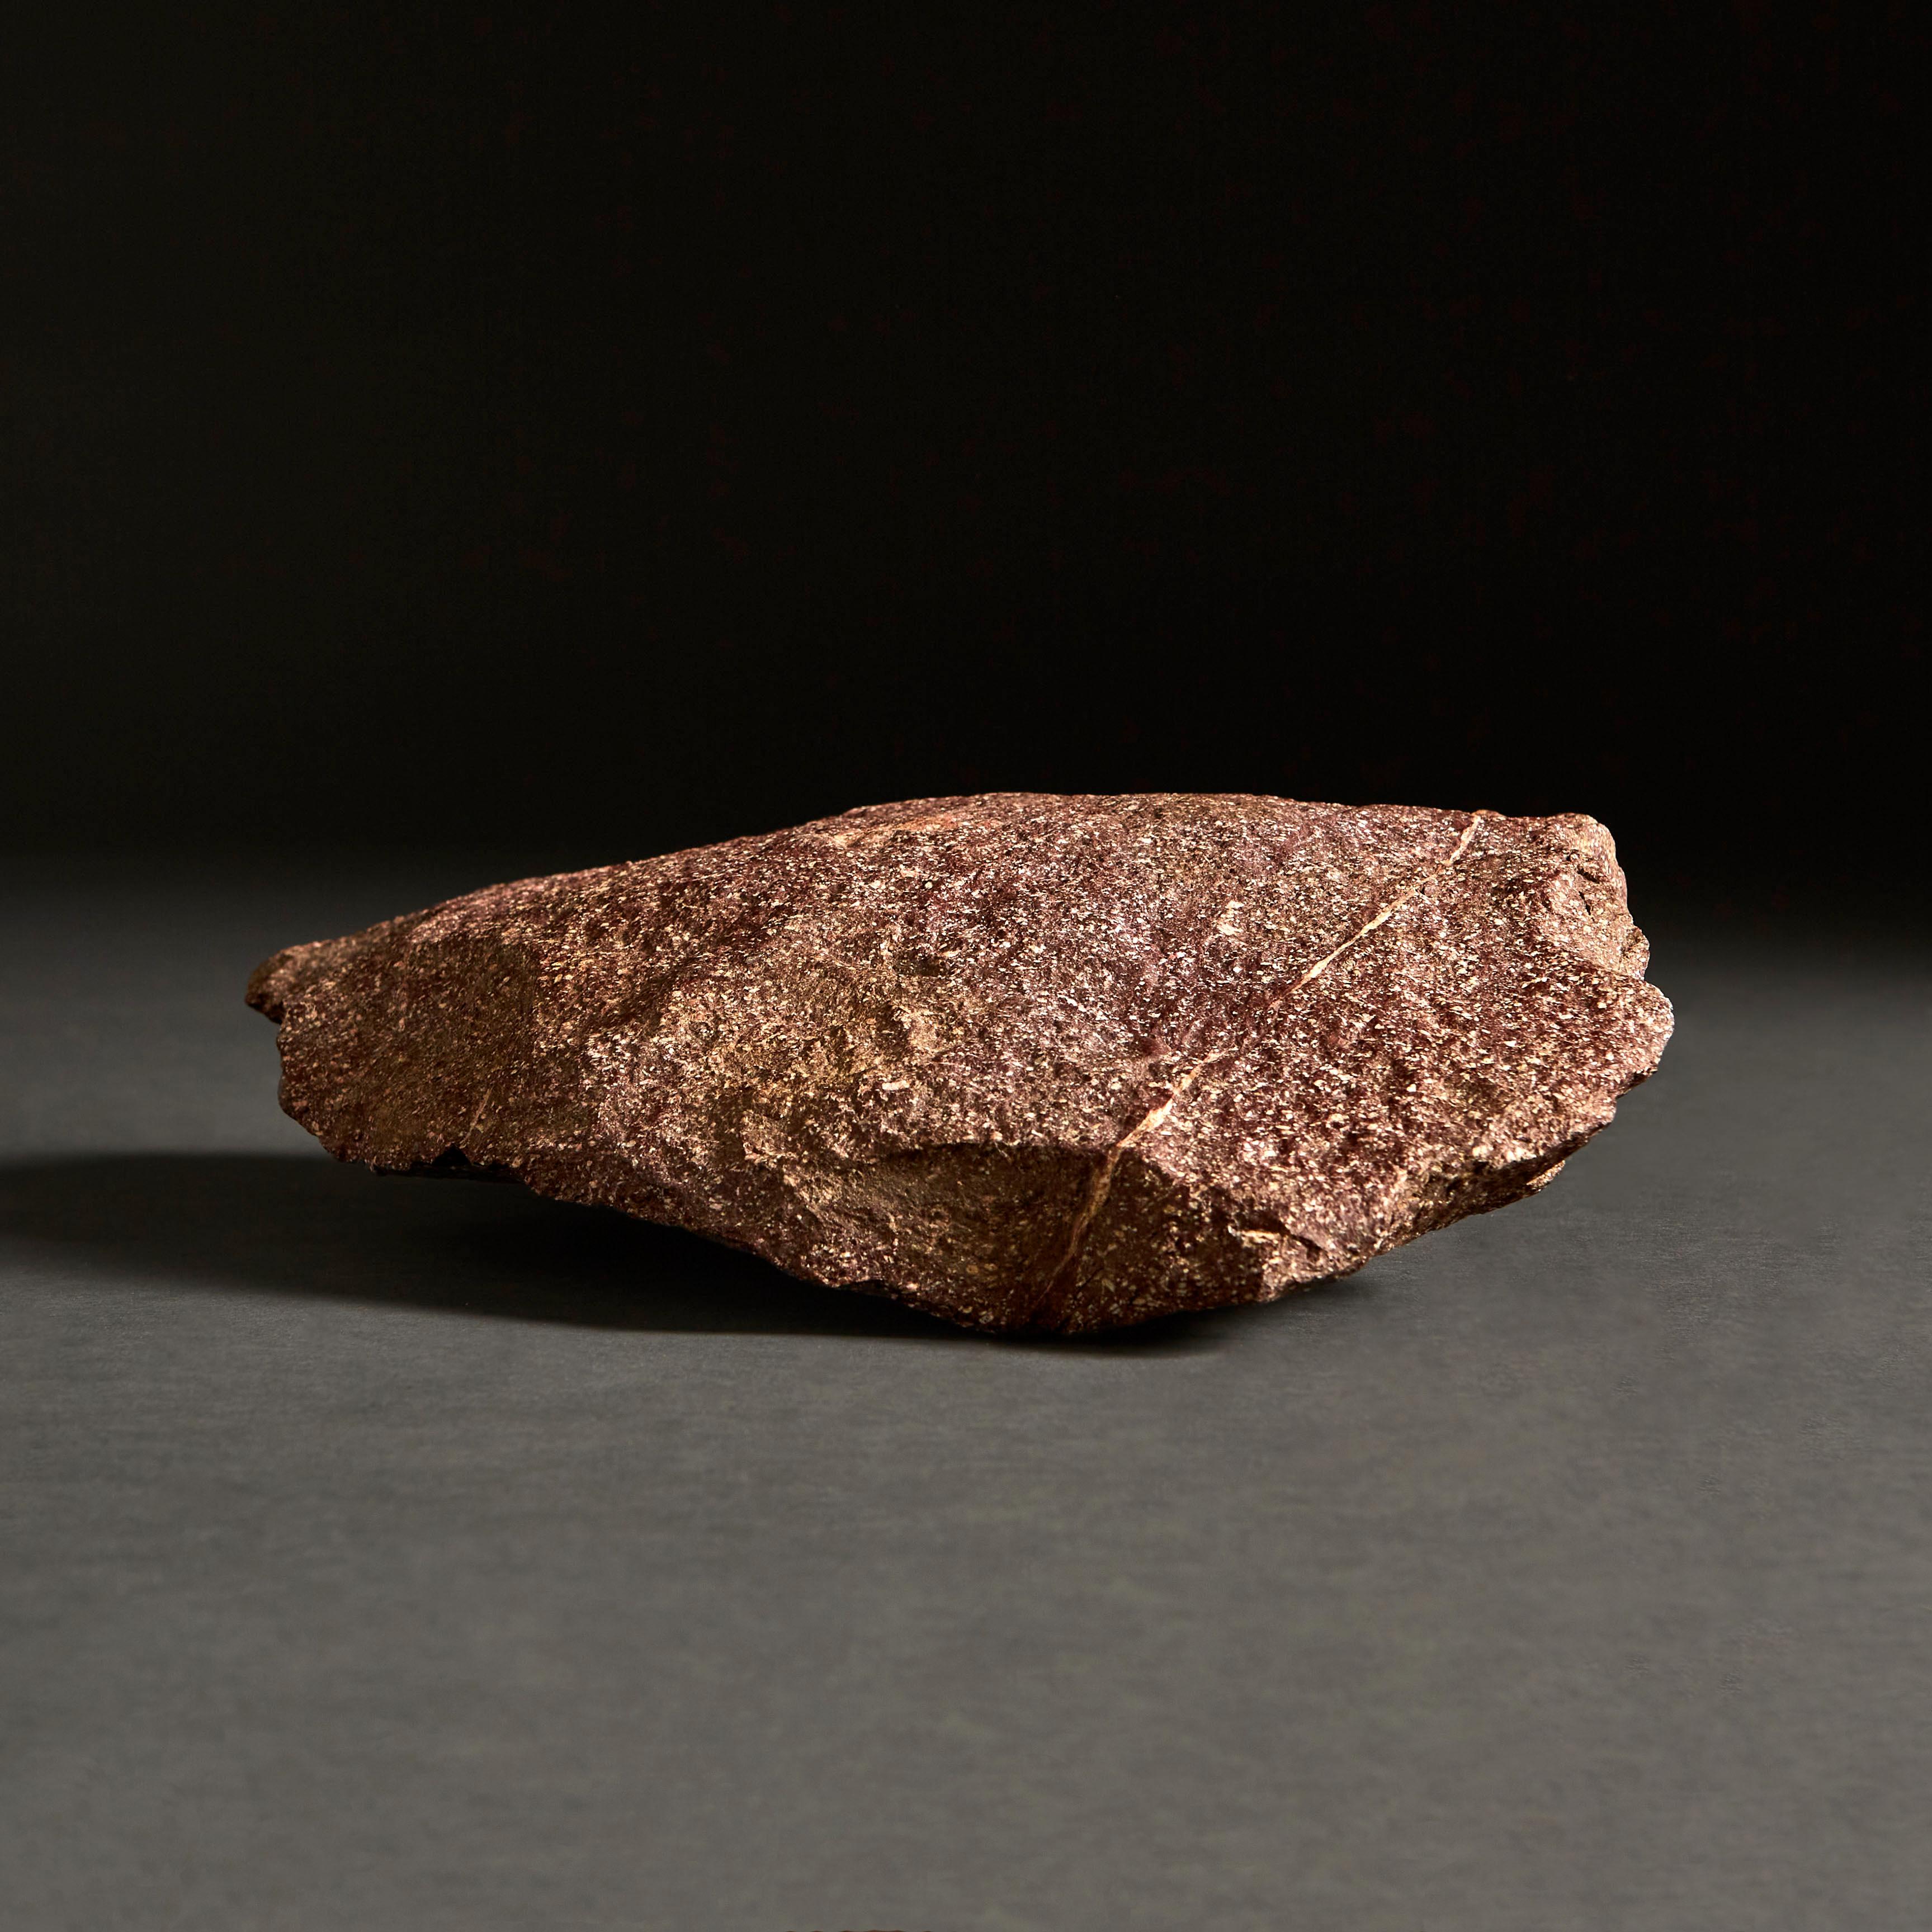 A shard of Egyptian Imperial porphyry, with jagged edges.